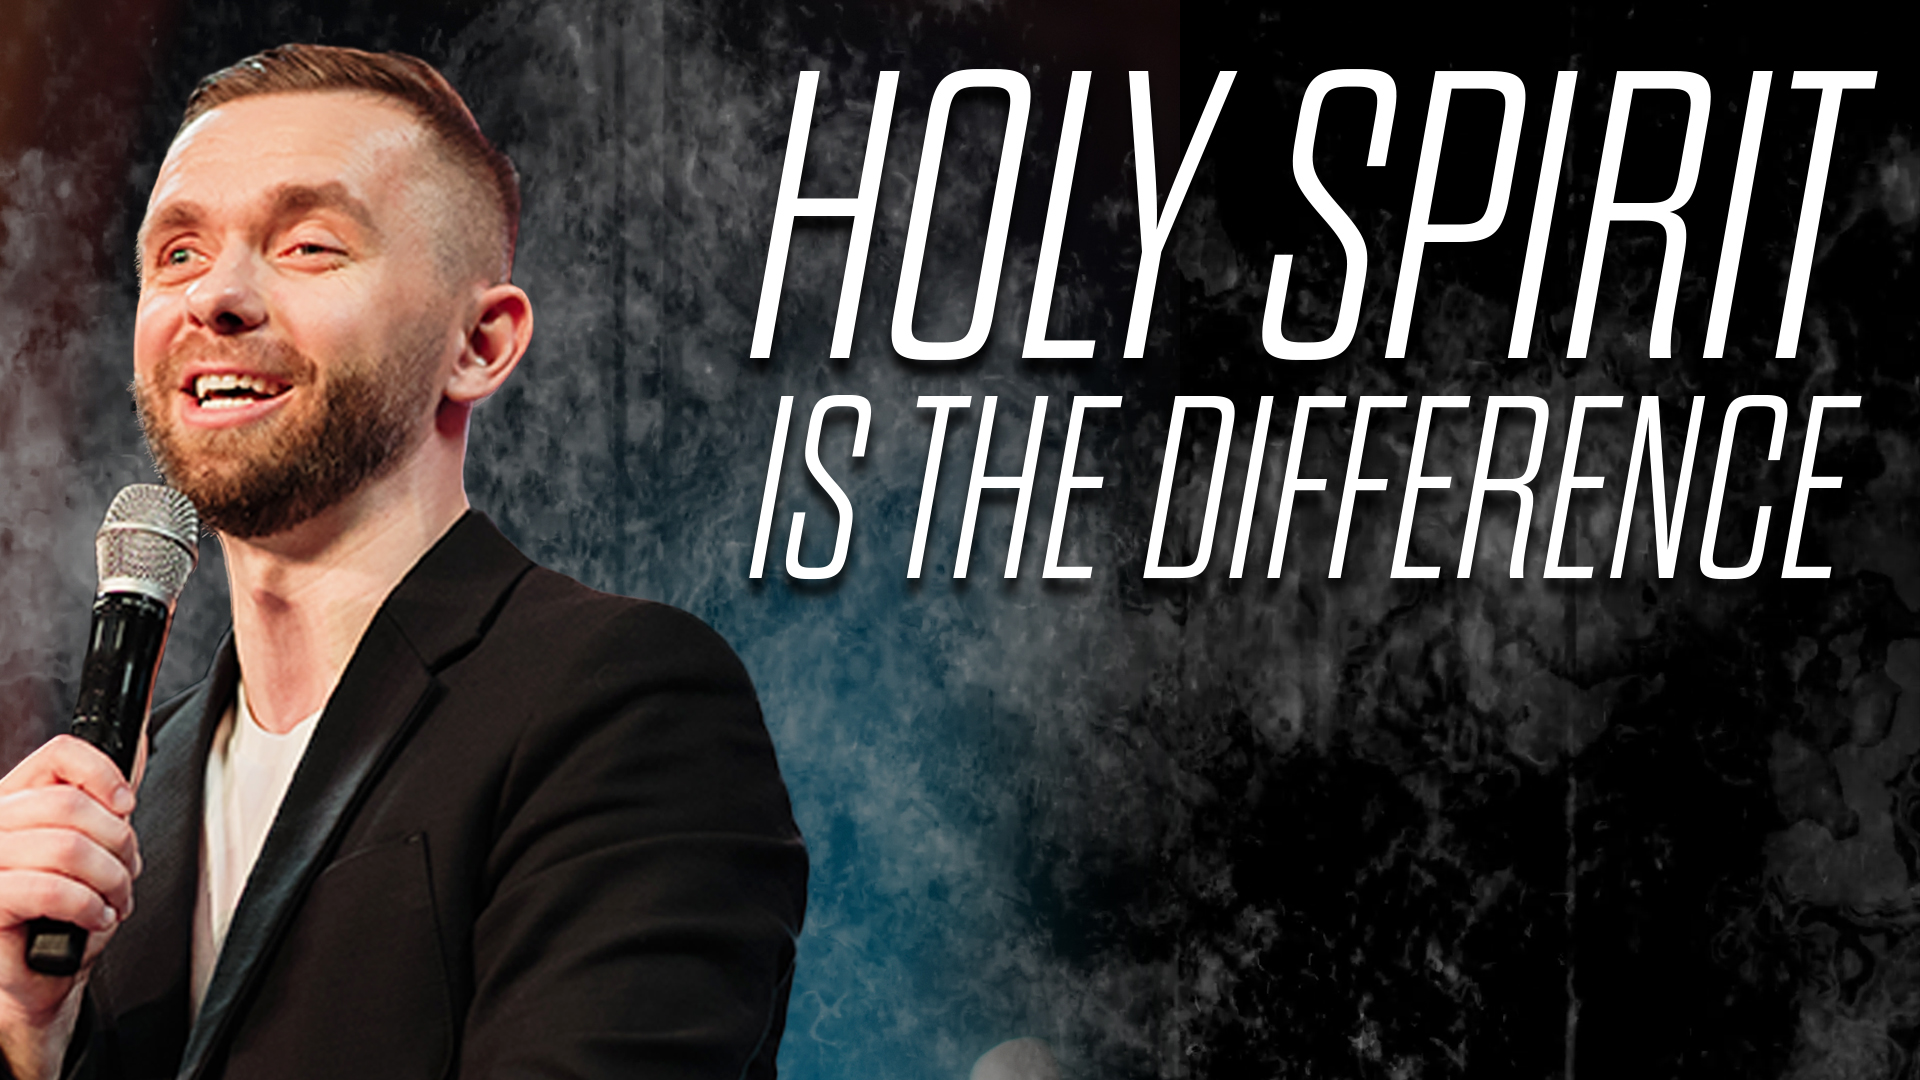 Featured Image for “Holy Spirit is the Difference”